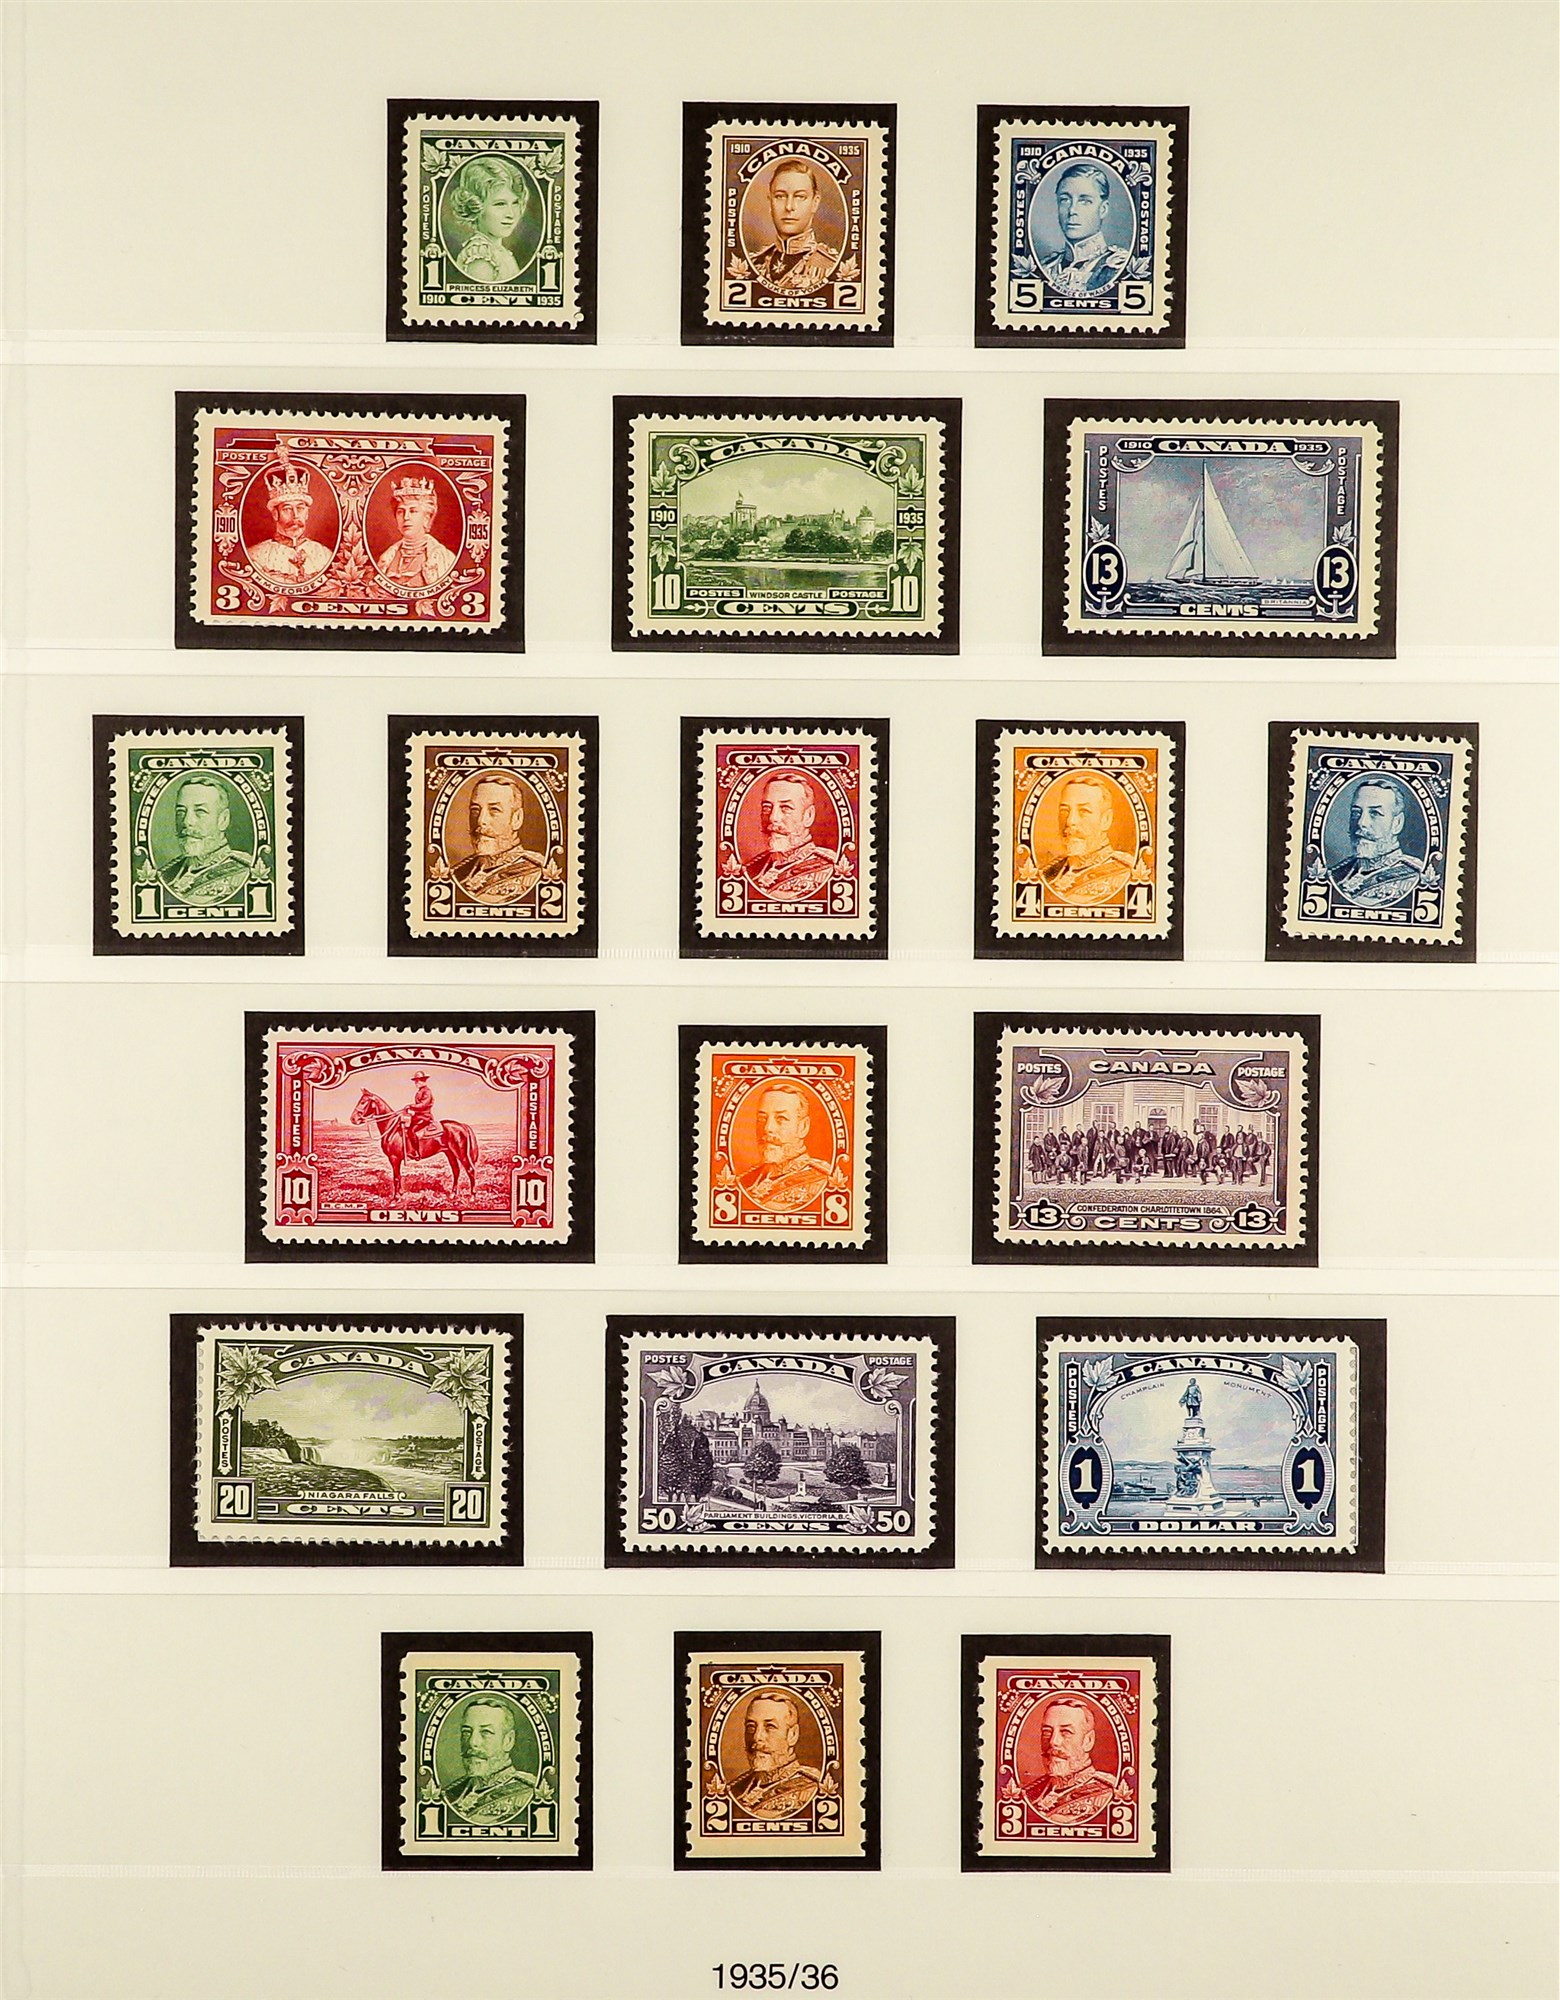 CANADA 1911 - 1936 MINT / NEVER HINGED MINT COLLECTION of around 150 stamps on hingeless pages, - Image 3 of 9